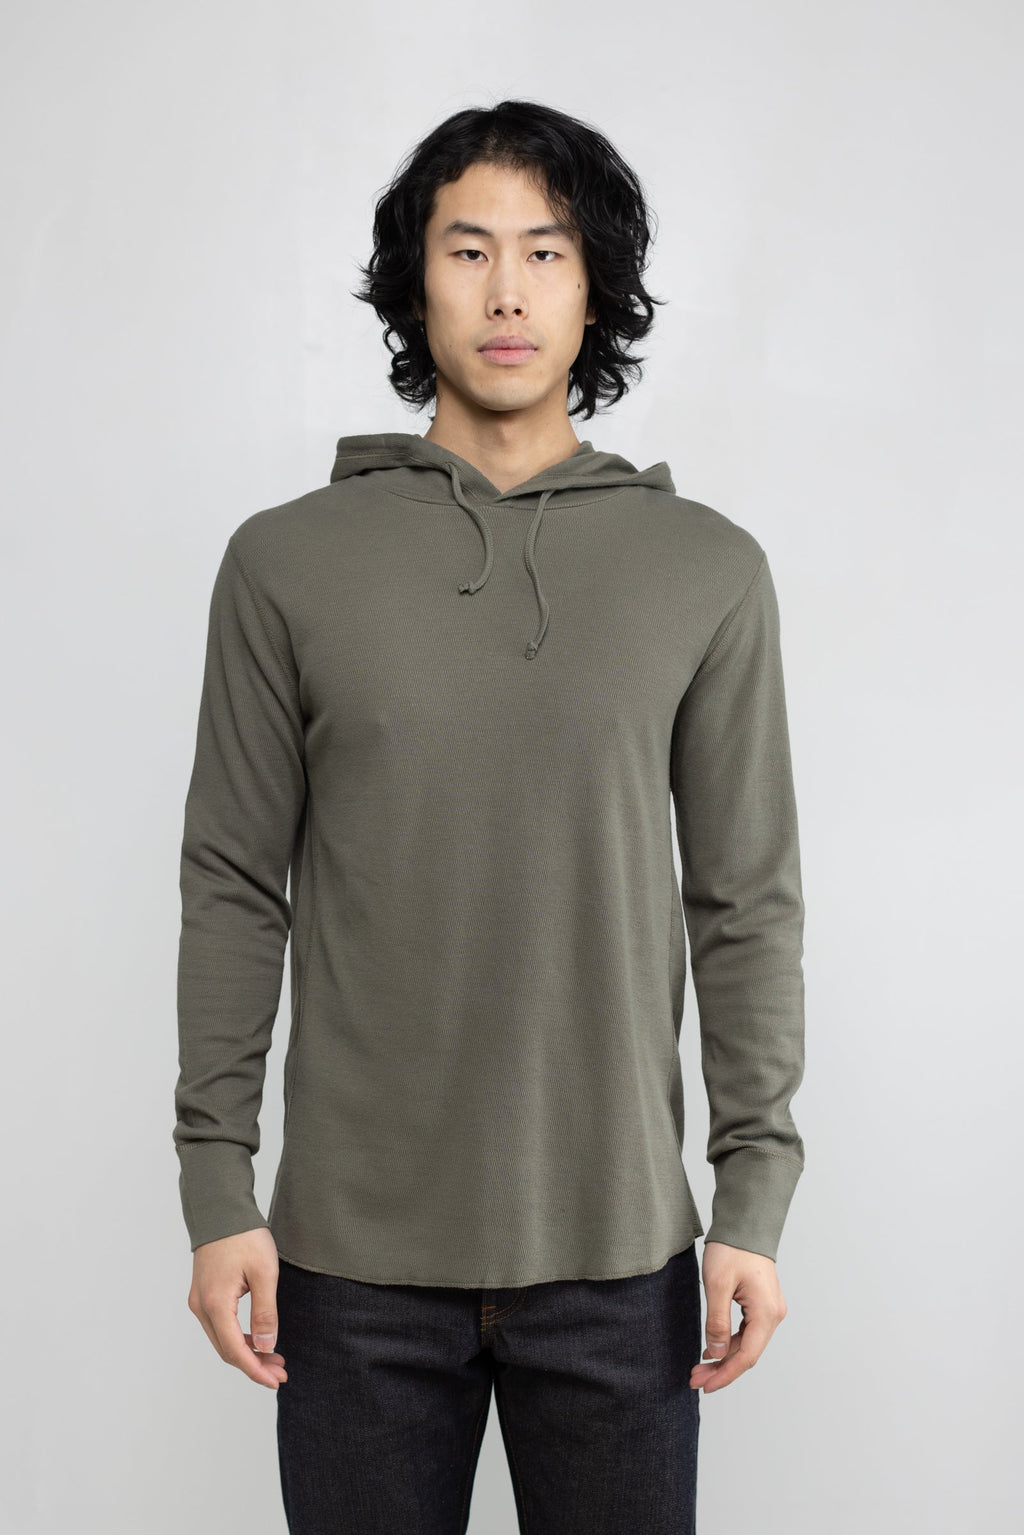 Mesh Thermal Pullover Hoodie in Army Green 01